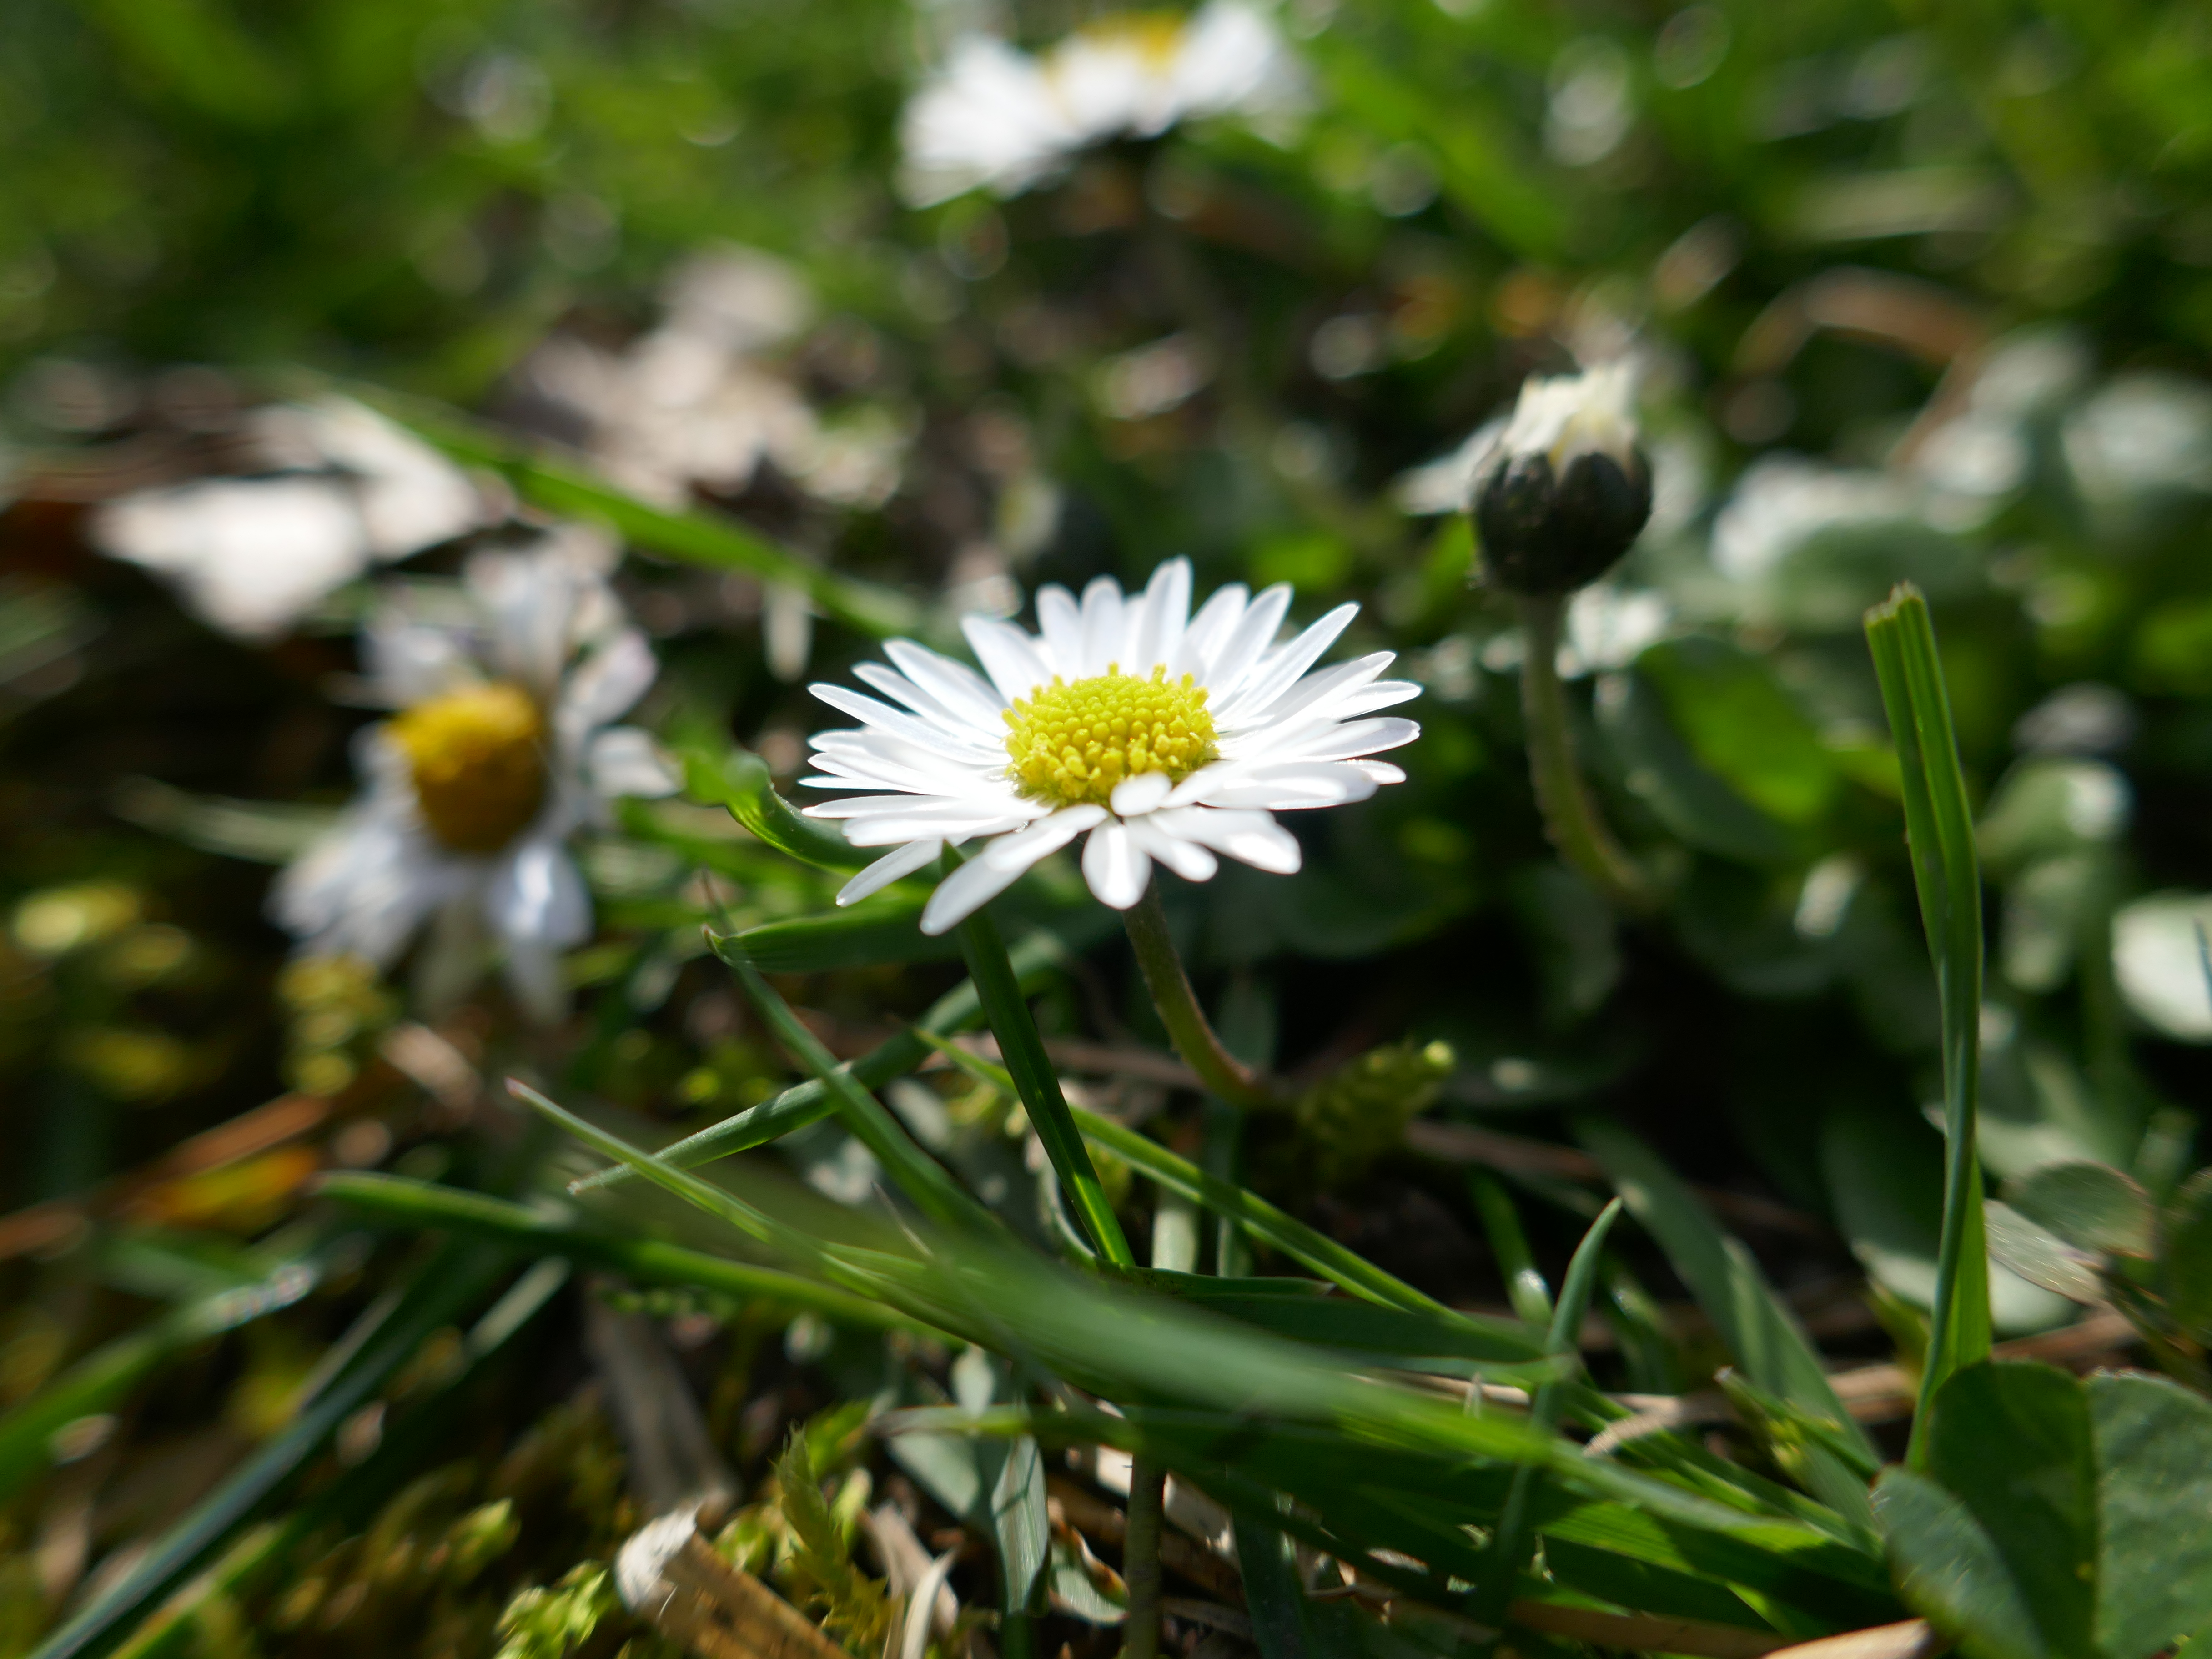 Daisy and Grass.